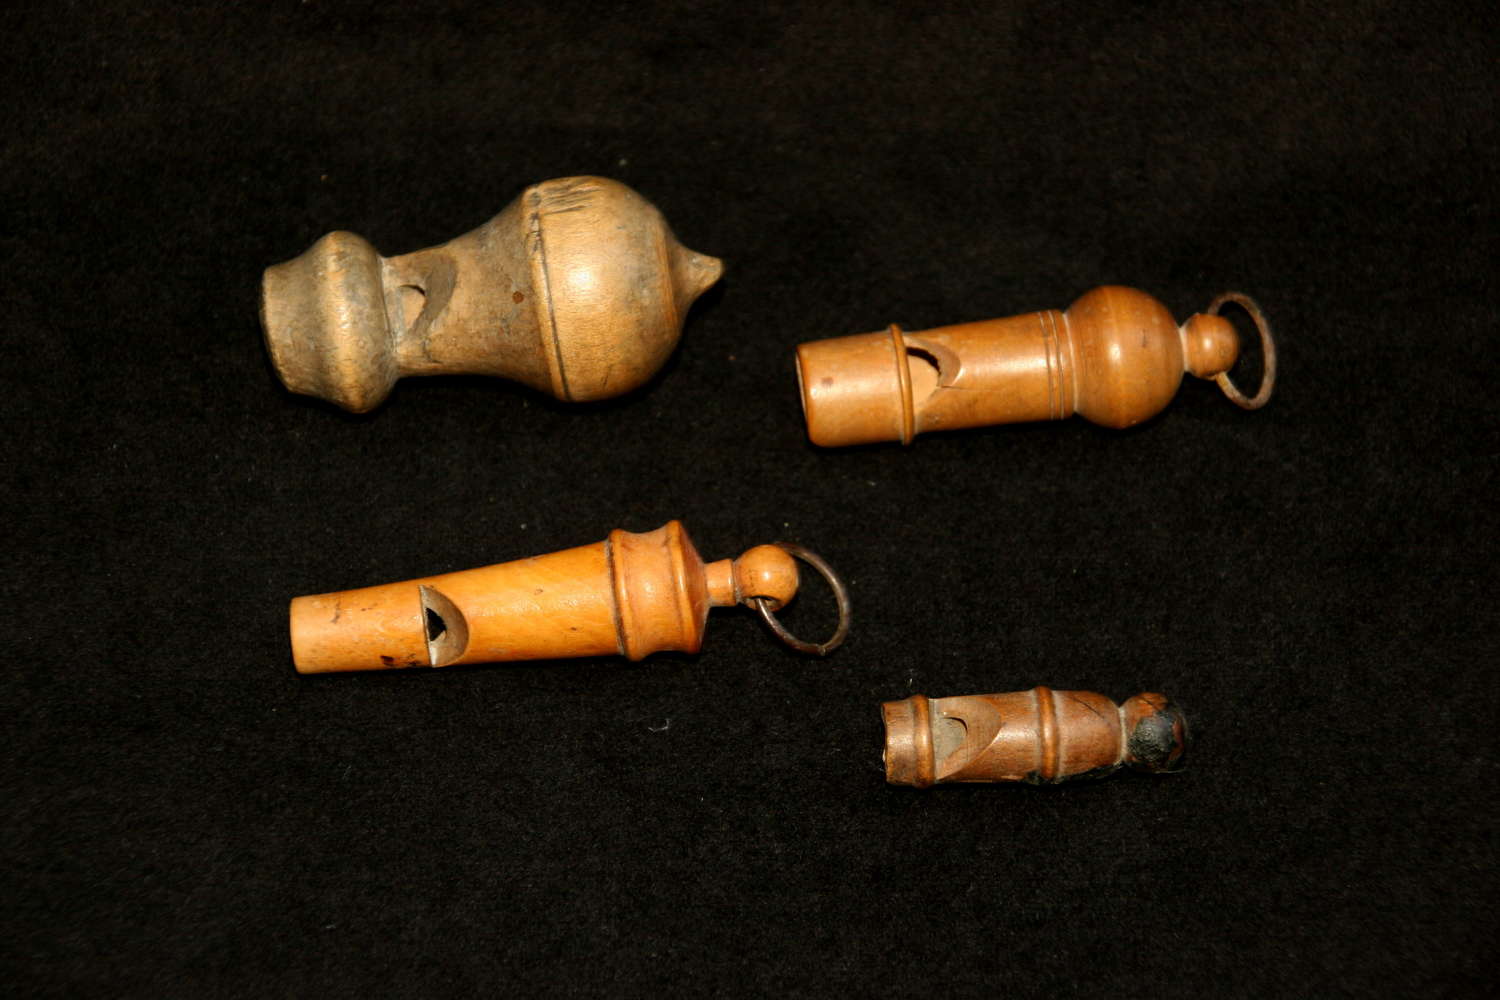 Four Treen Whistles, 18th and 19th centuries